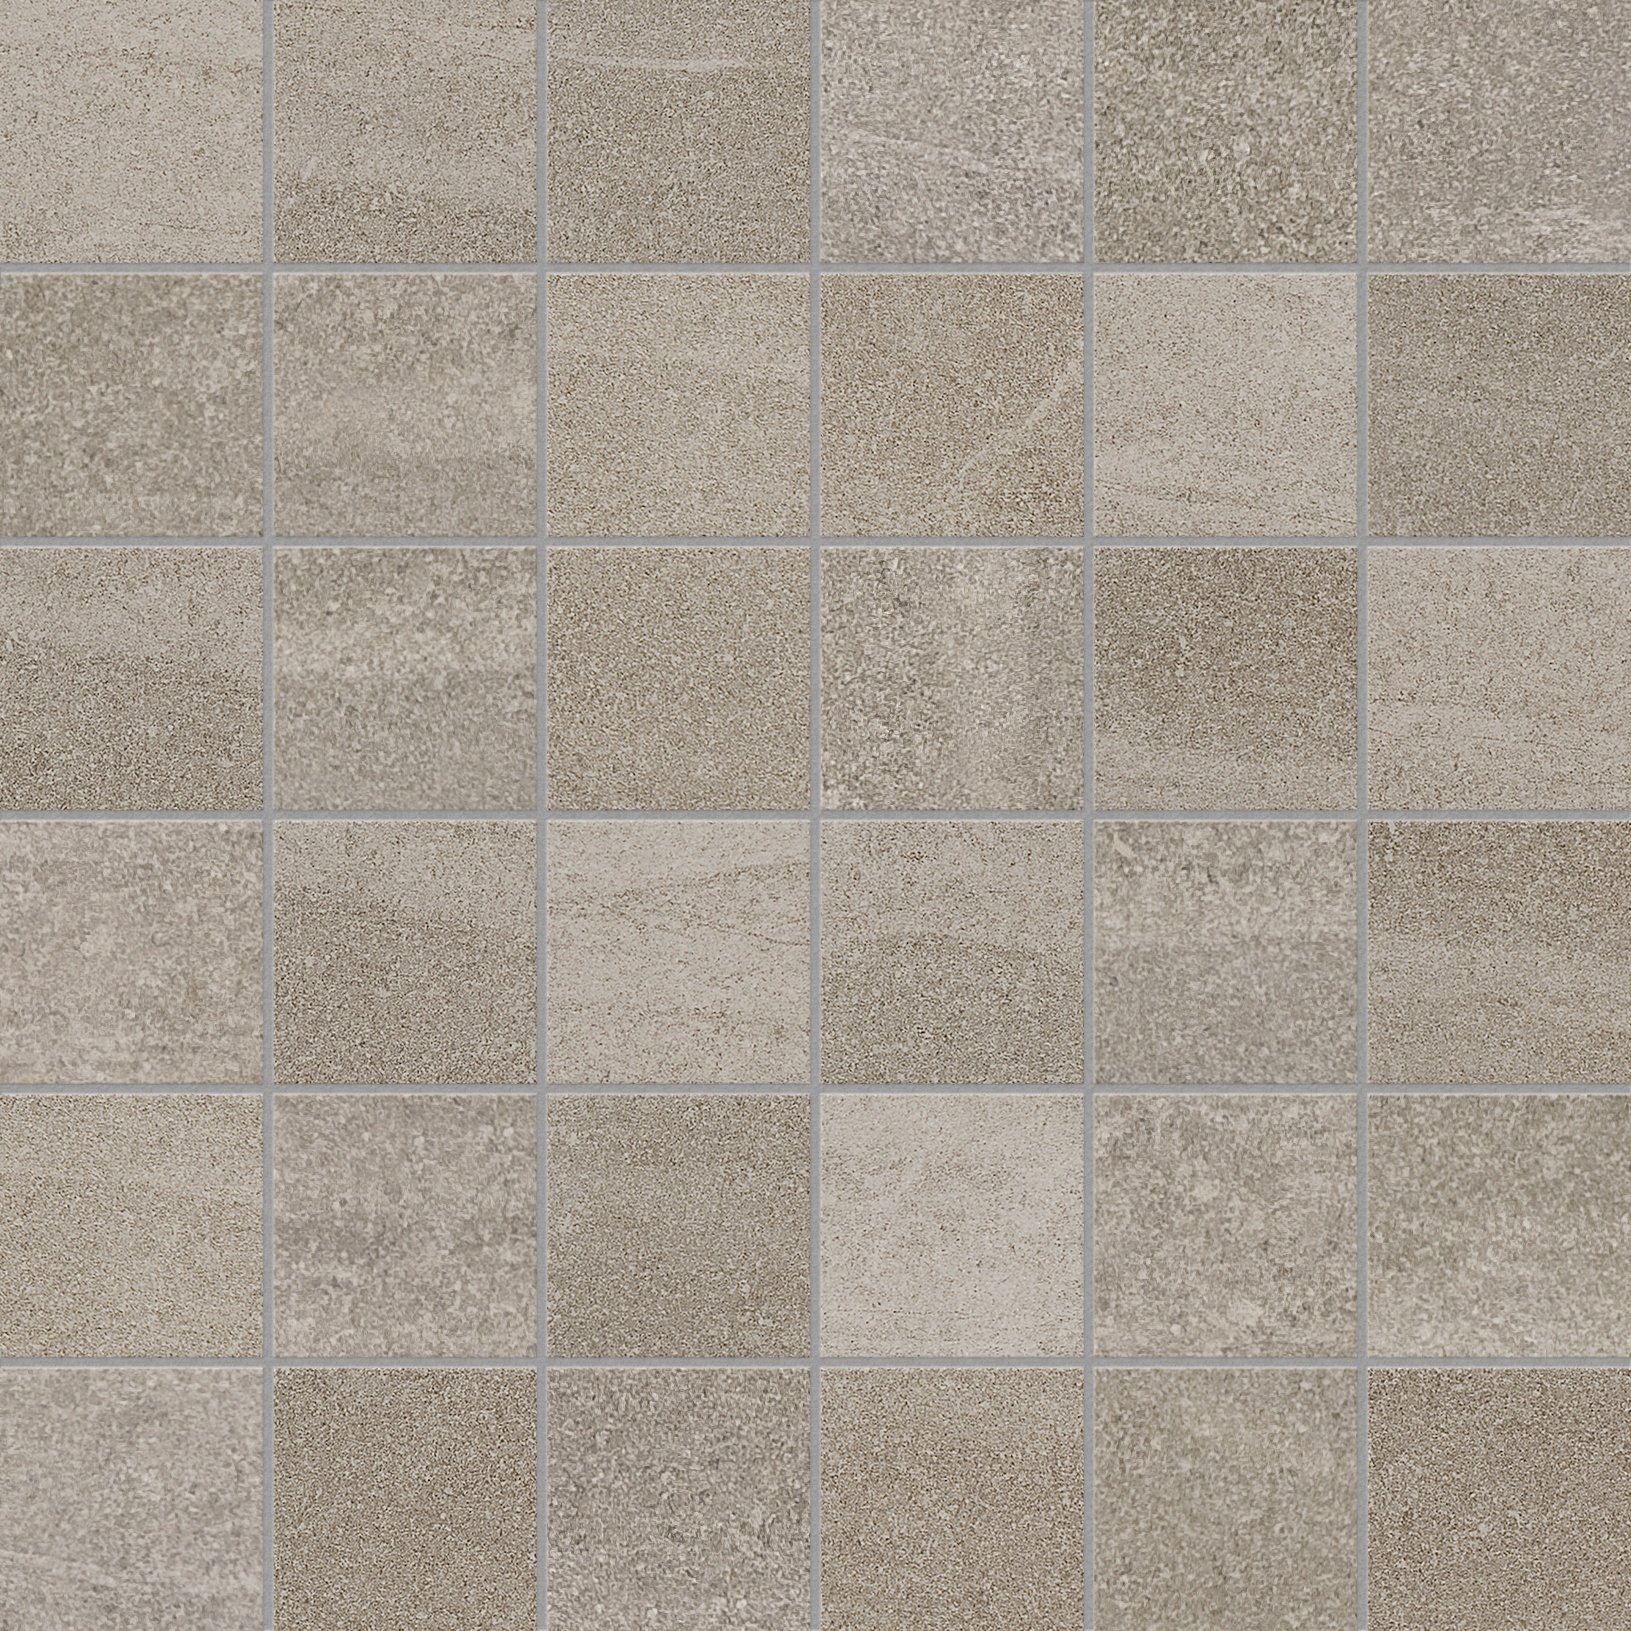 earth straight stack 2x2-inch pattern glazed porcelain mosaic from crux anatolia collection distributed by surface group international matte finish straight edge edge mesh shape